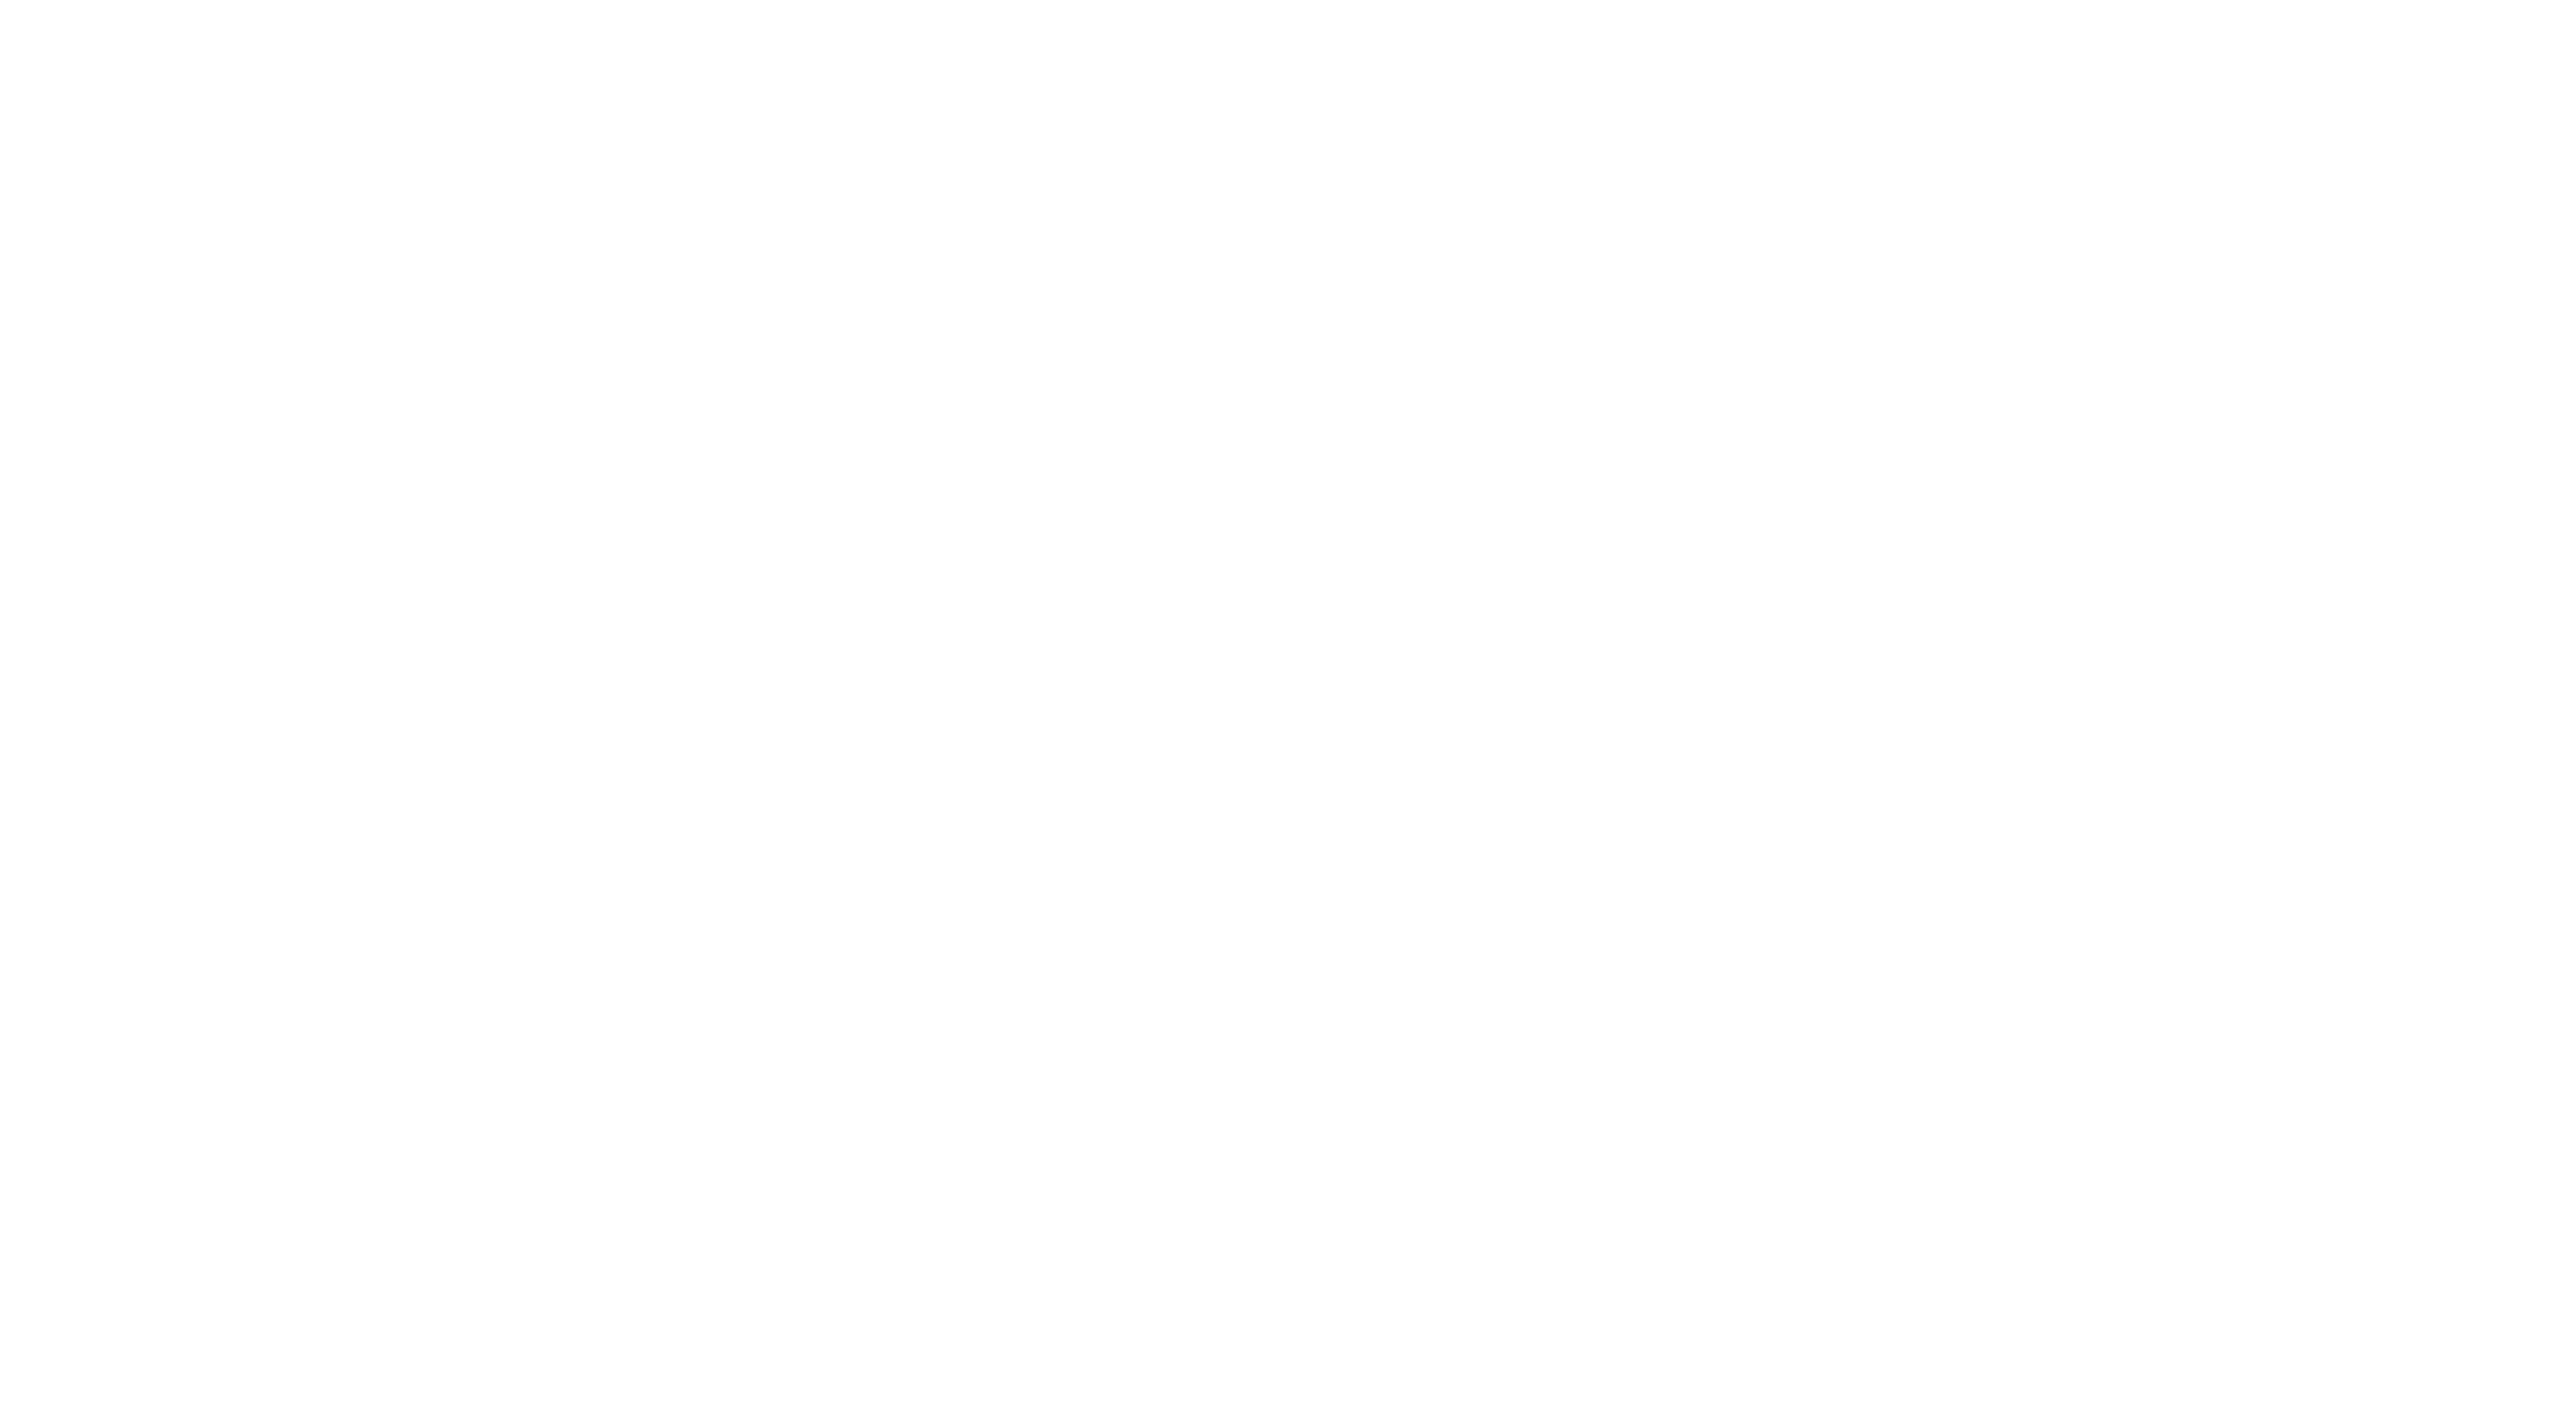 Midwest Travel Deals & Sweepstakes